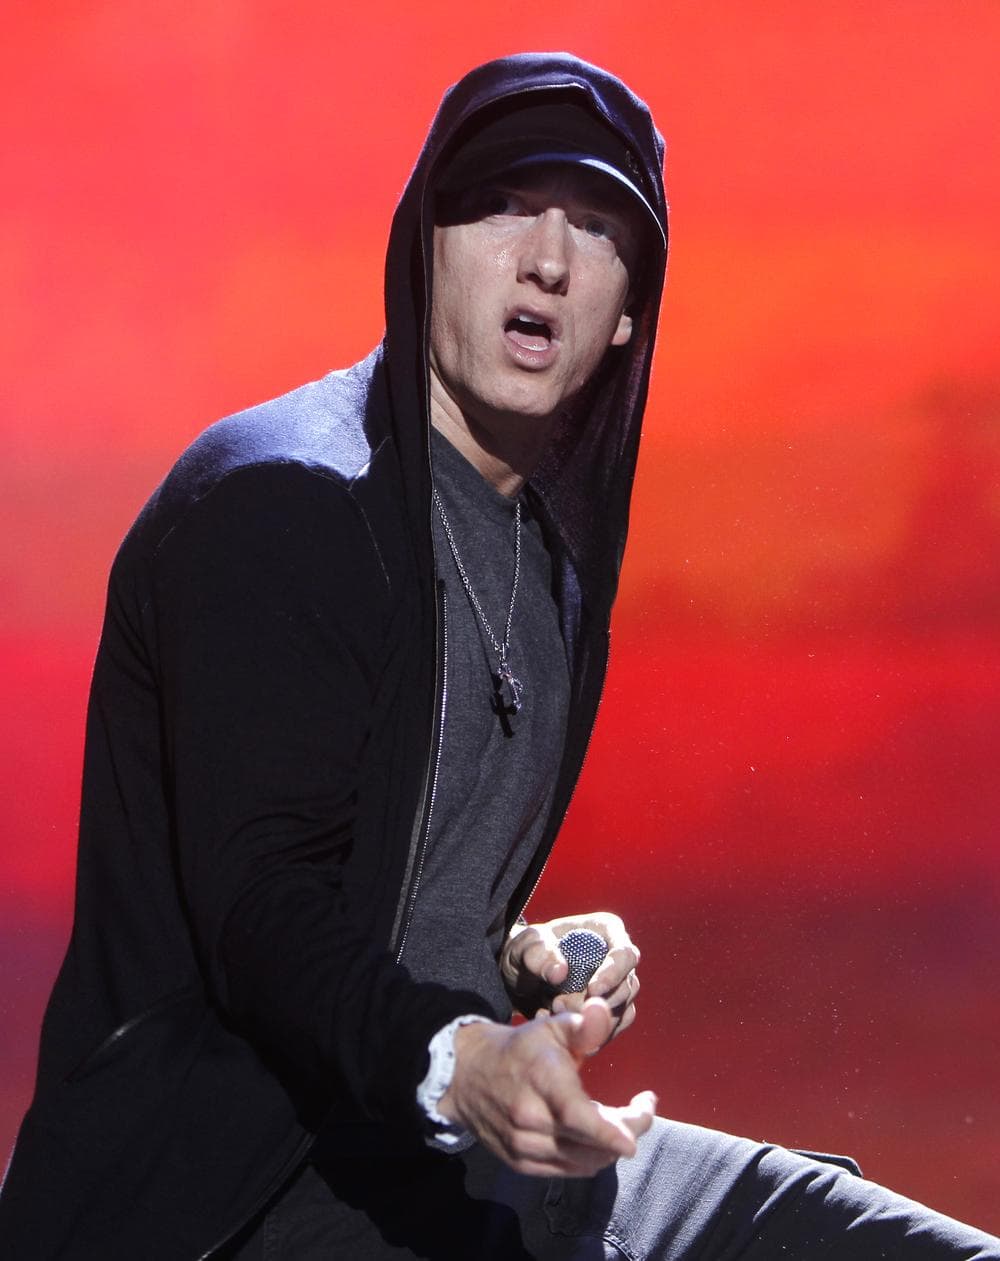 FILE - In this Sept. 13, 2010 file photo, rapper Eminem performs at Yankee Stadium in New York. (AP Photo/Jason DeCrow, File)